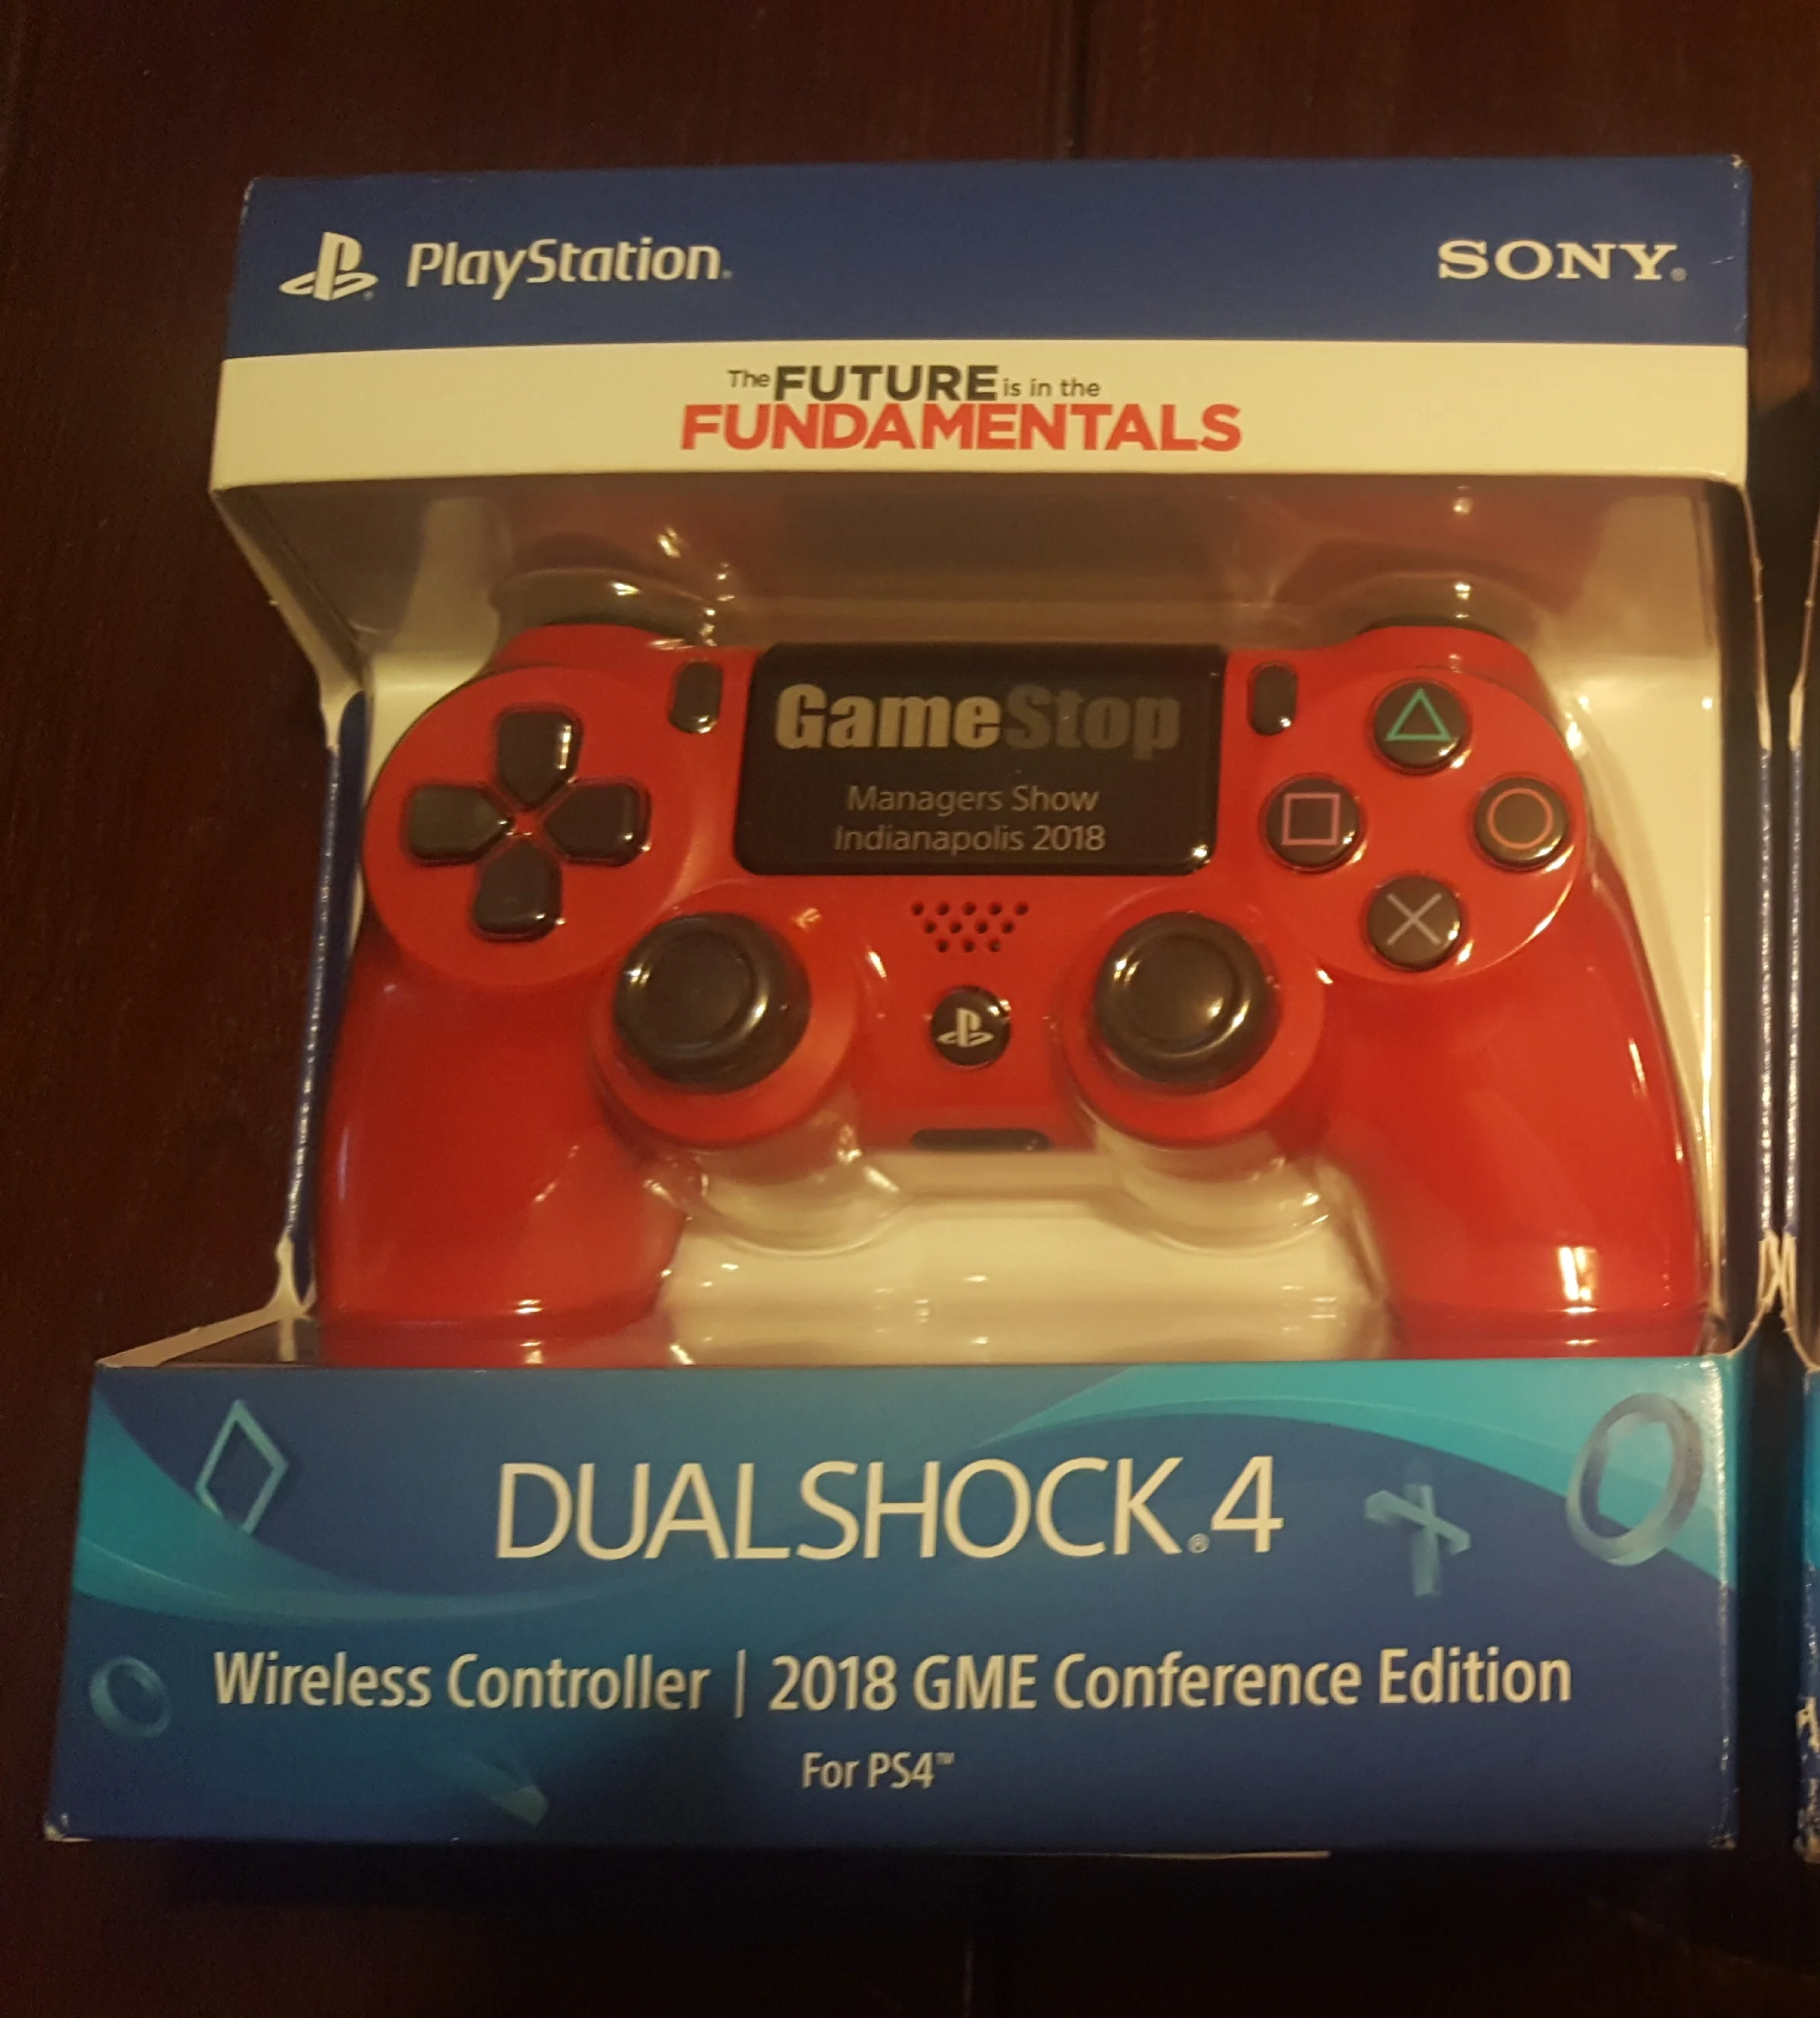  Sony Playstation 4 GameStop Management Expo 2018 Controller